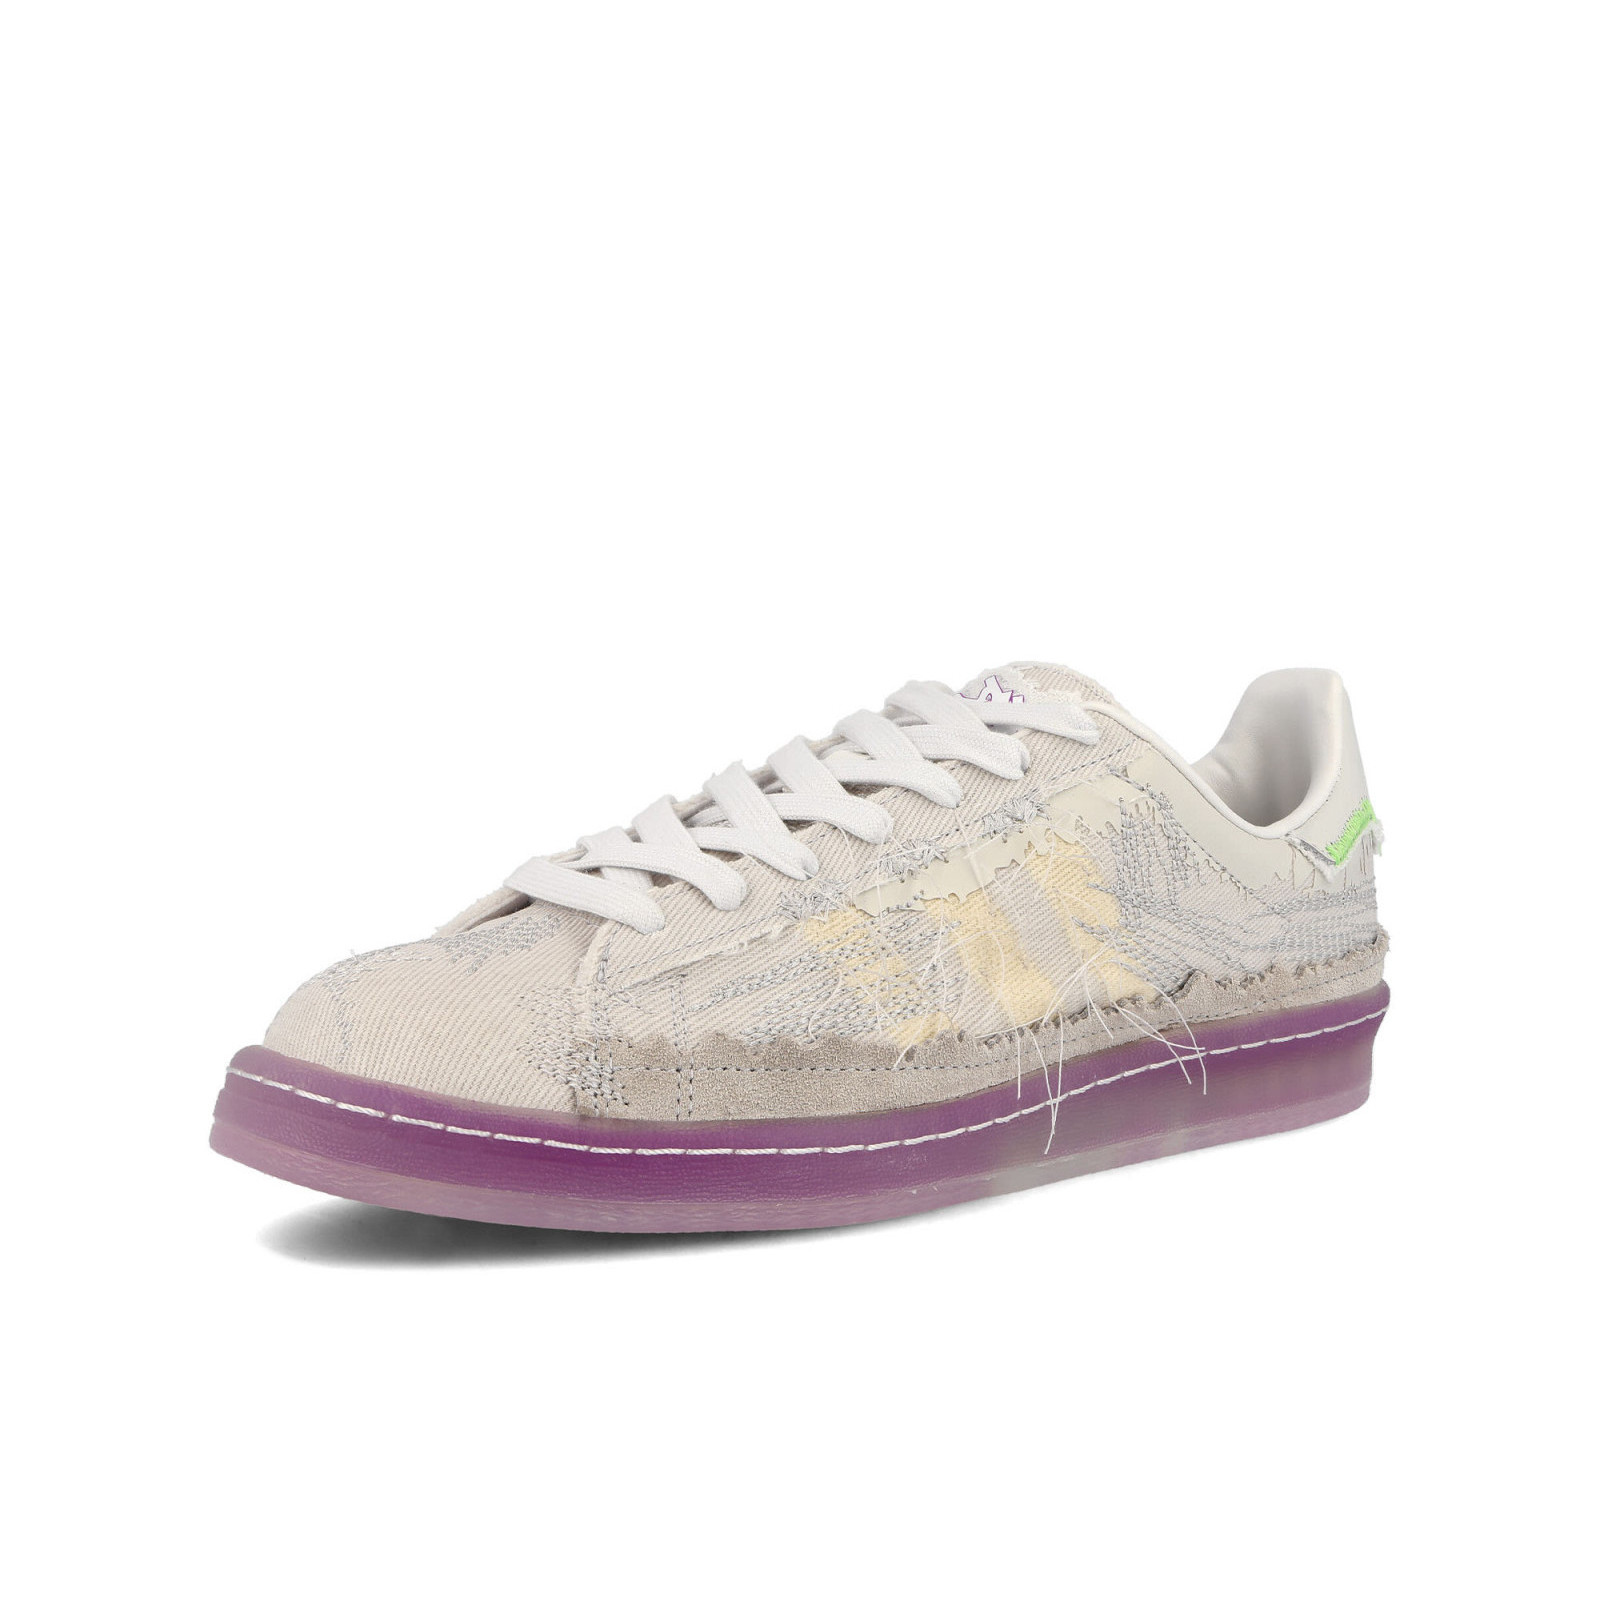 Youth of Paris x adidas Campus
Crystal White